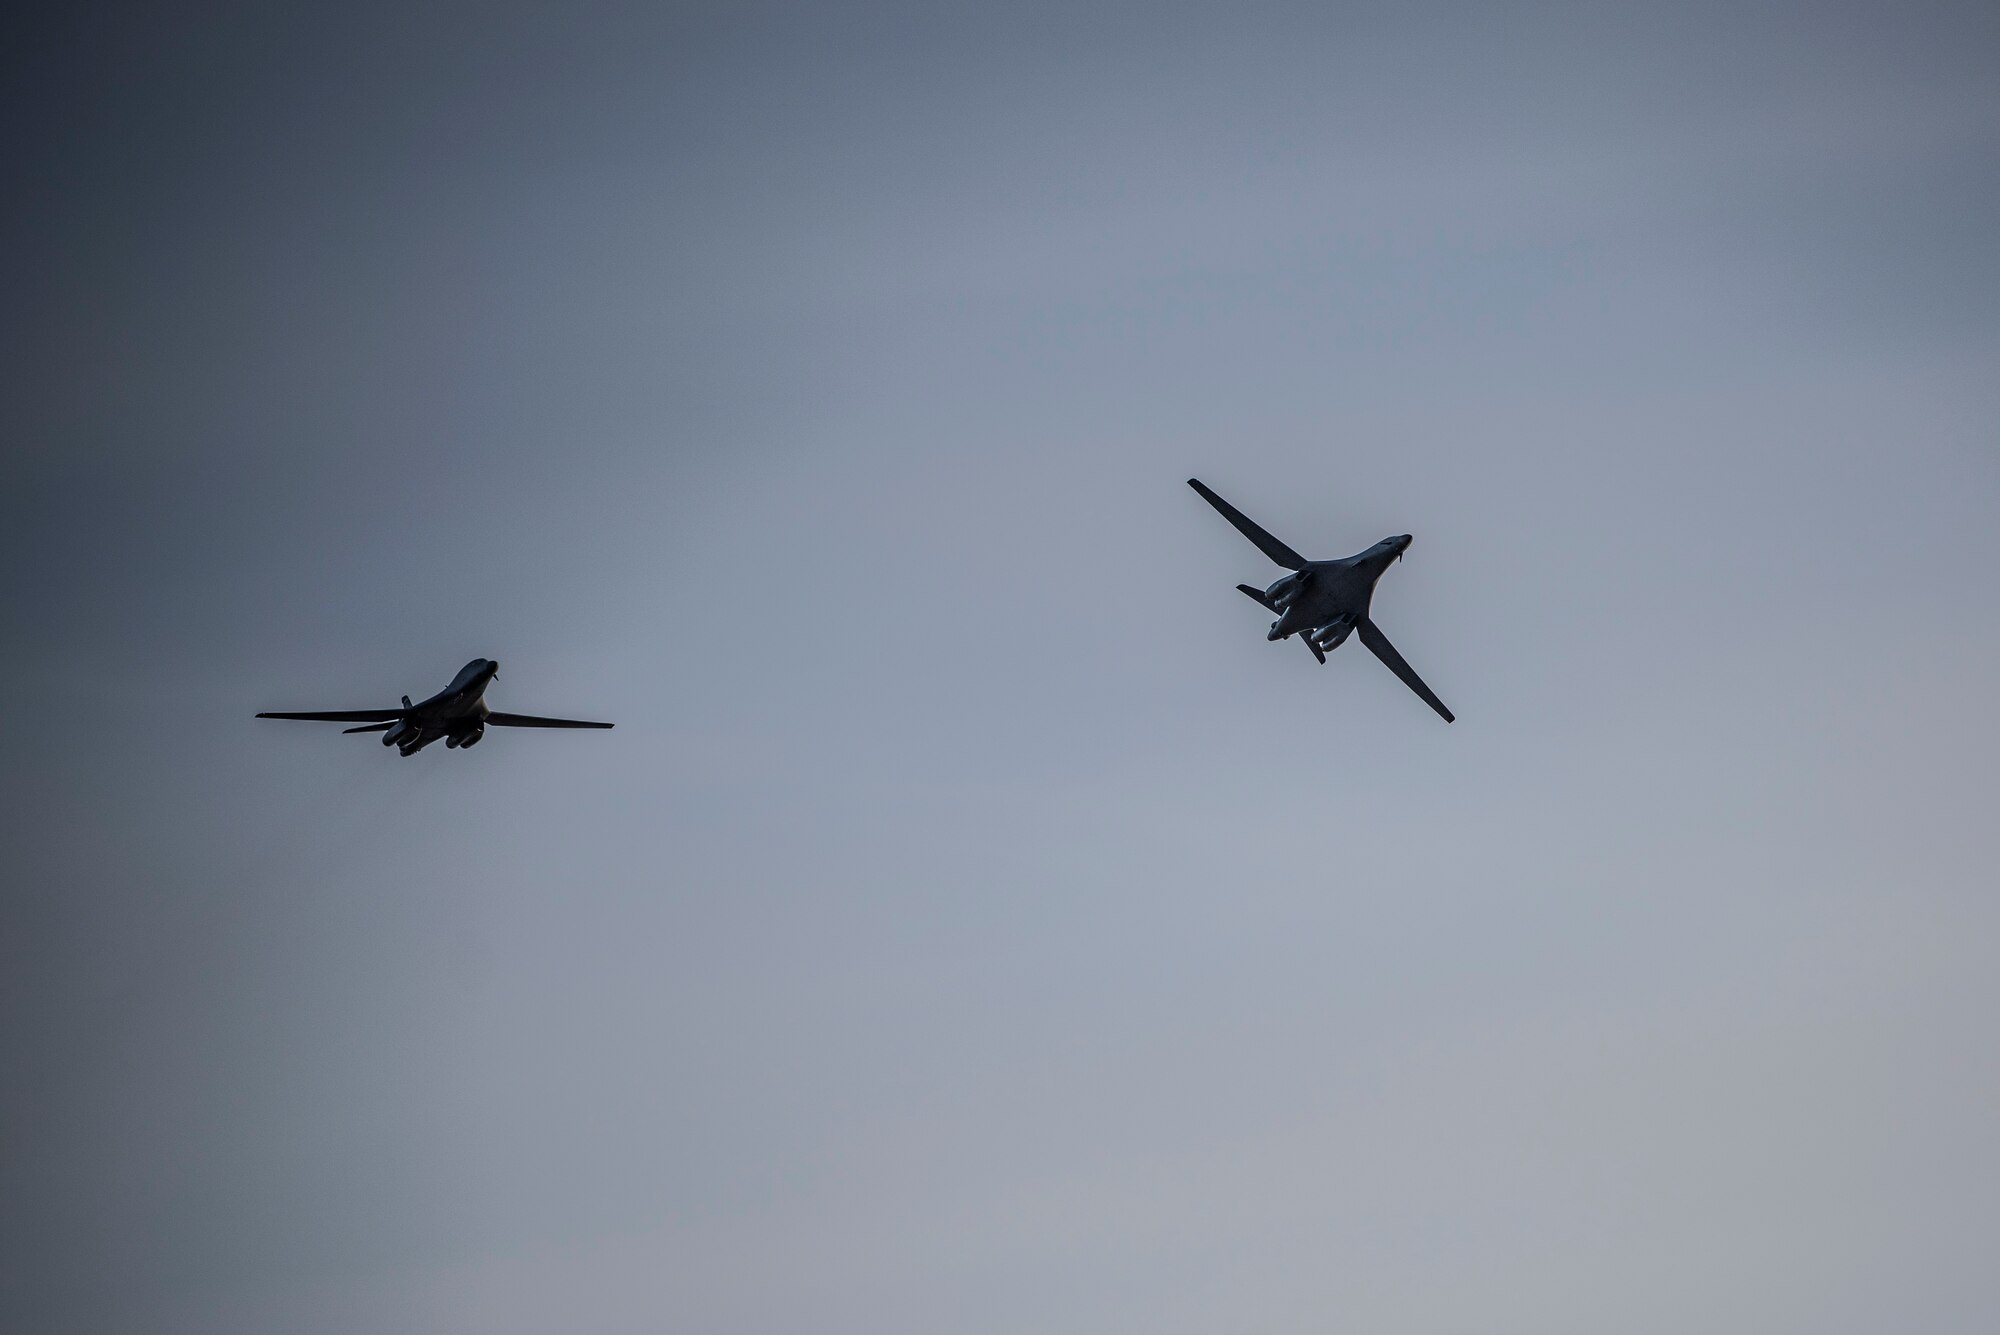 Two B-1B Lancers assigned to the 9th Expeditionary Bomb Squadron fly above Ørland Air Force Station, Norway, March 14, 2021. The 9th EBS participated in Bomber Task Force training missions that provided aircrew the opportunity to train and work with U.S. allies and partners in joint and coalition operations and exercises. (U.S. Air Force photo by Airman 1st Class Colin Hollowell)